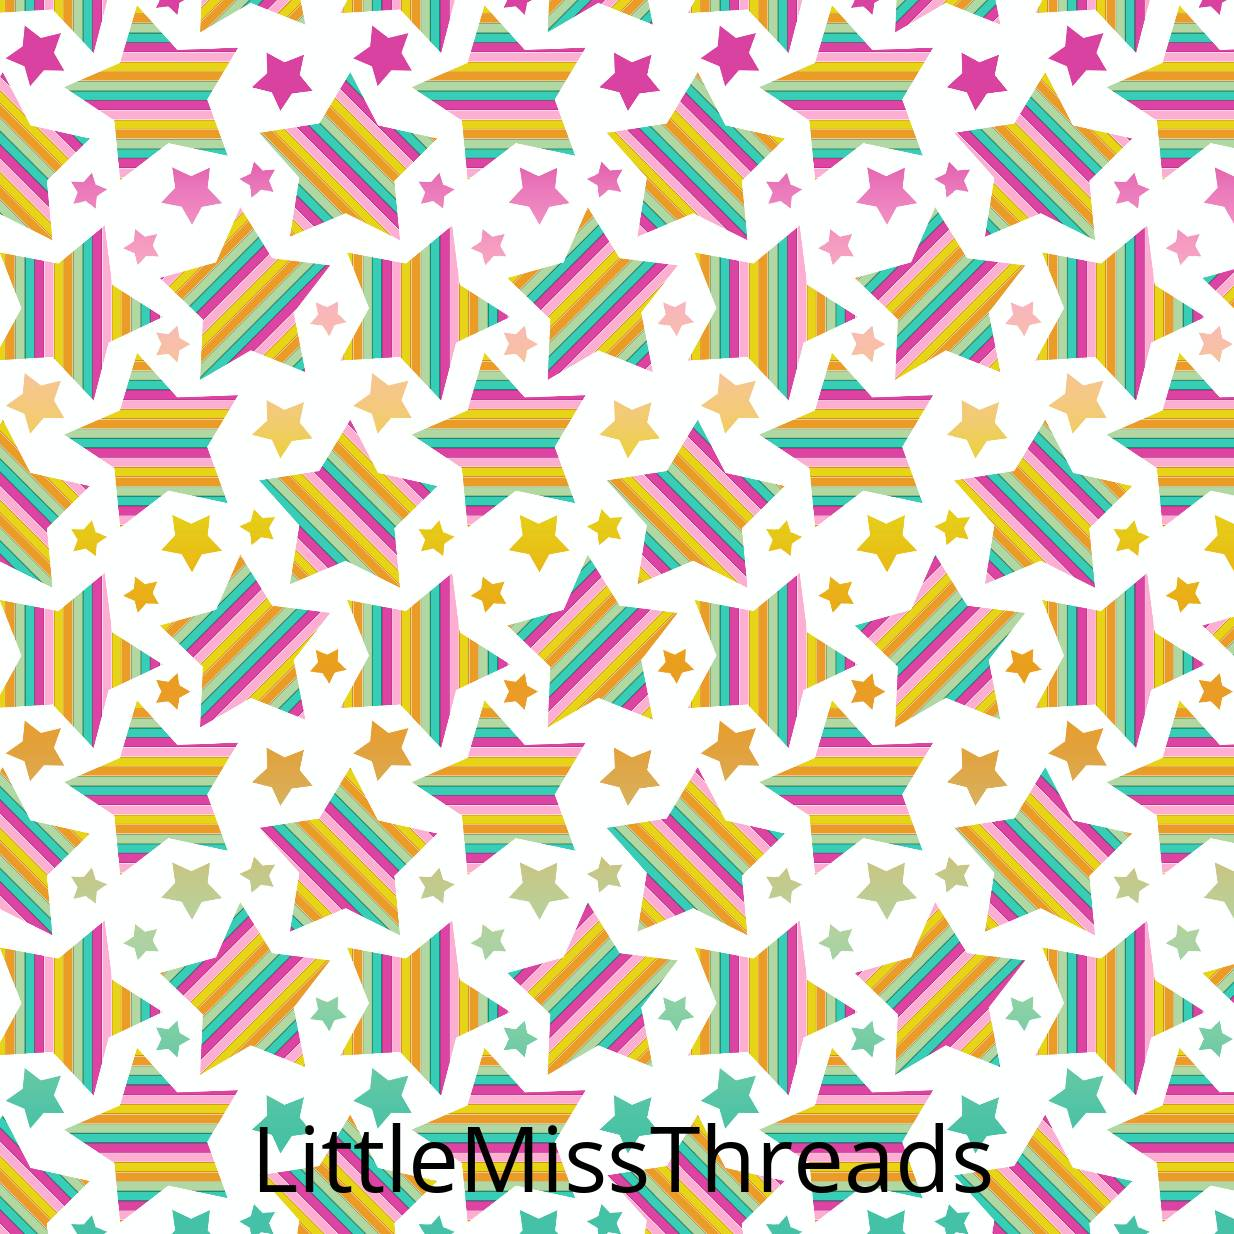 PRE ORDER - Trolls Stars - Fabric - Fabric from [store] by Little Miss Threads - 